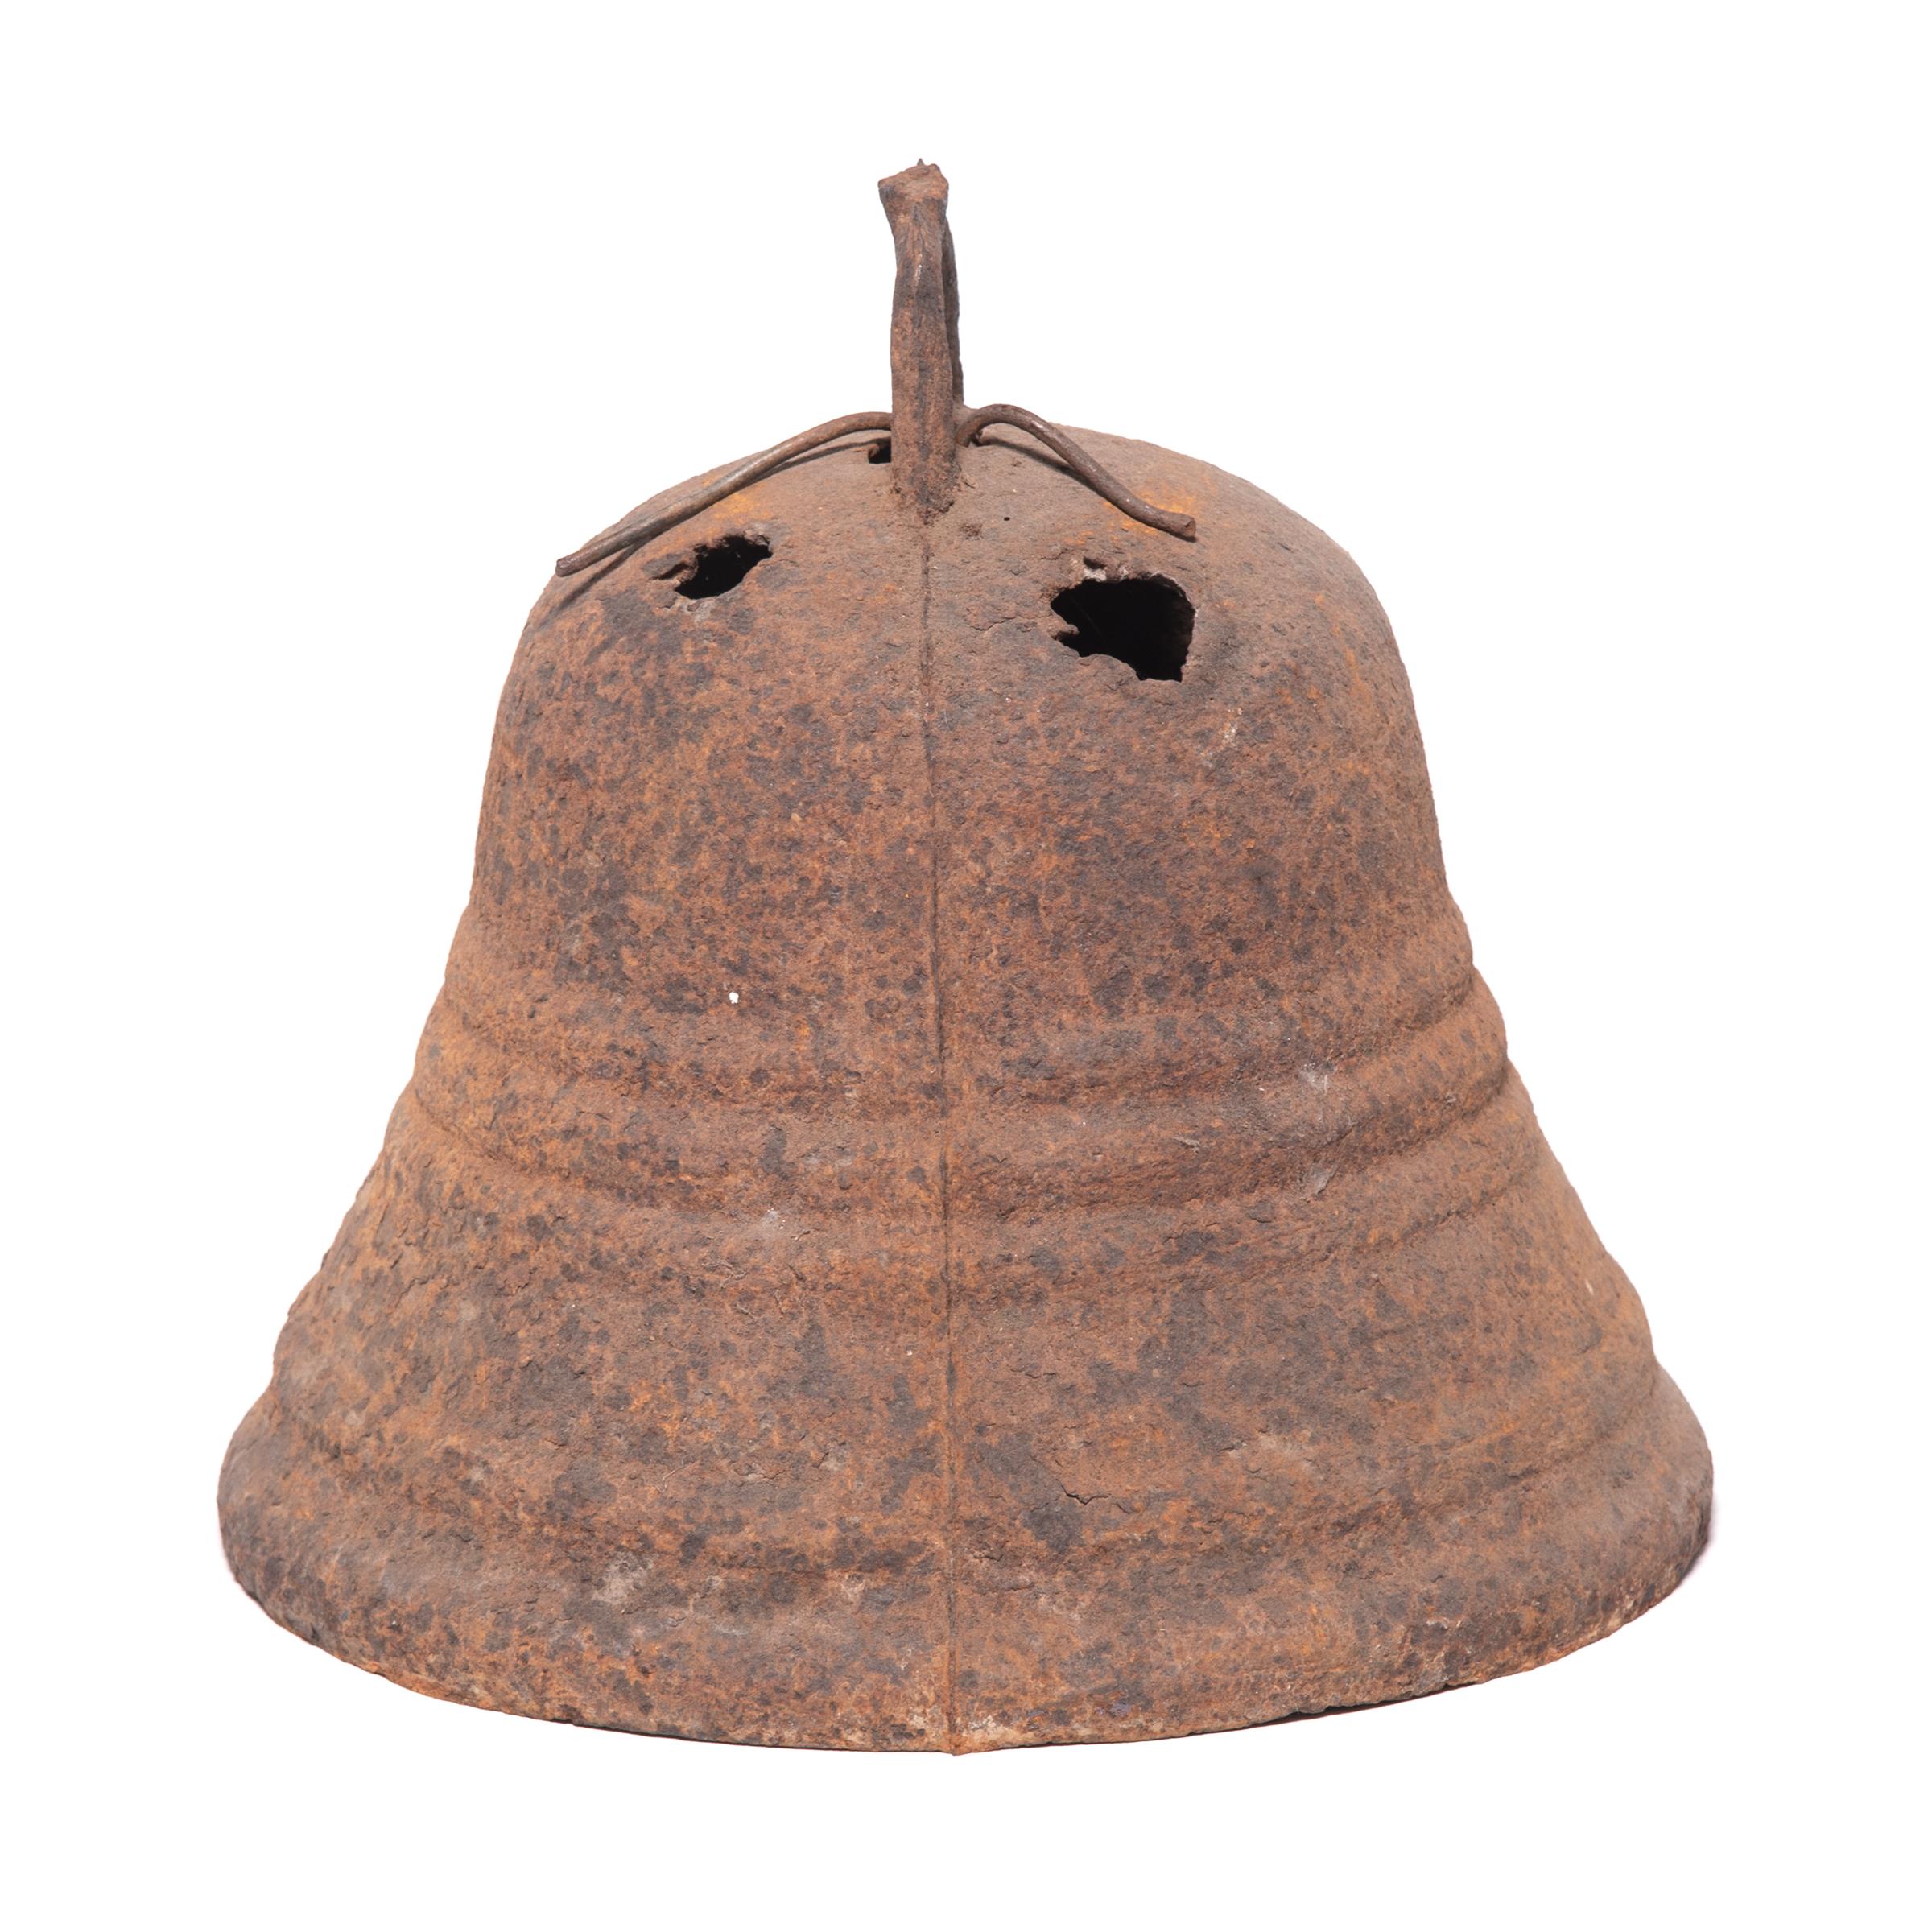 This rustic, 19th century iron bell once pealed in celebration or gave notice of important events in a town in northern China. Complete with its original clapper and marked with holes from being suspended upon a pole, this bell is a delightful